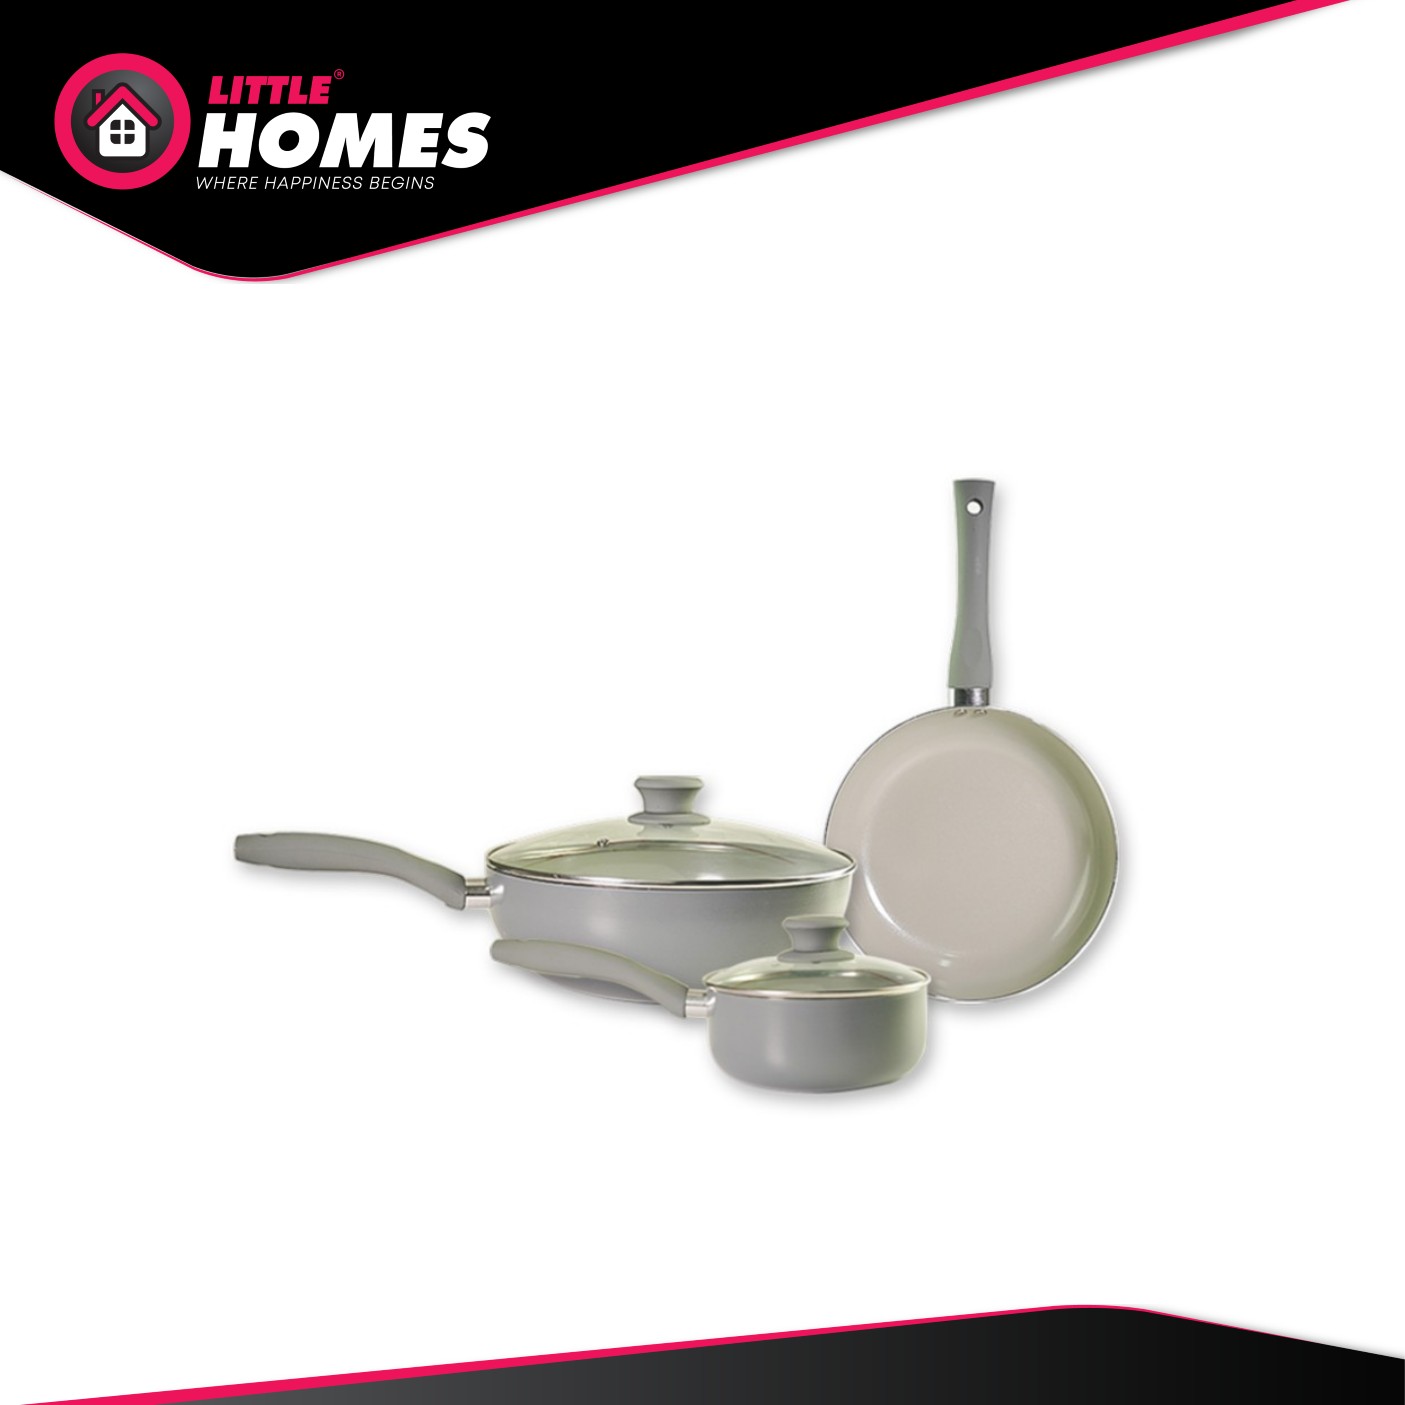 Little Homes Ceramic Grey Pan Cookware Set with Glass Lid